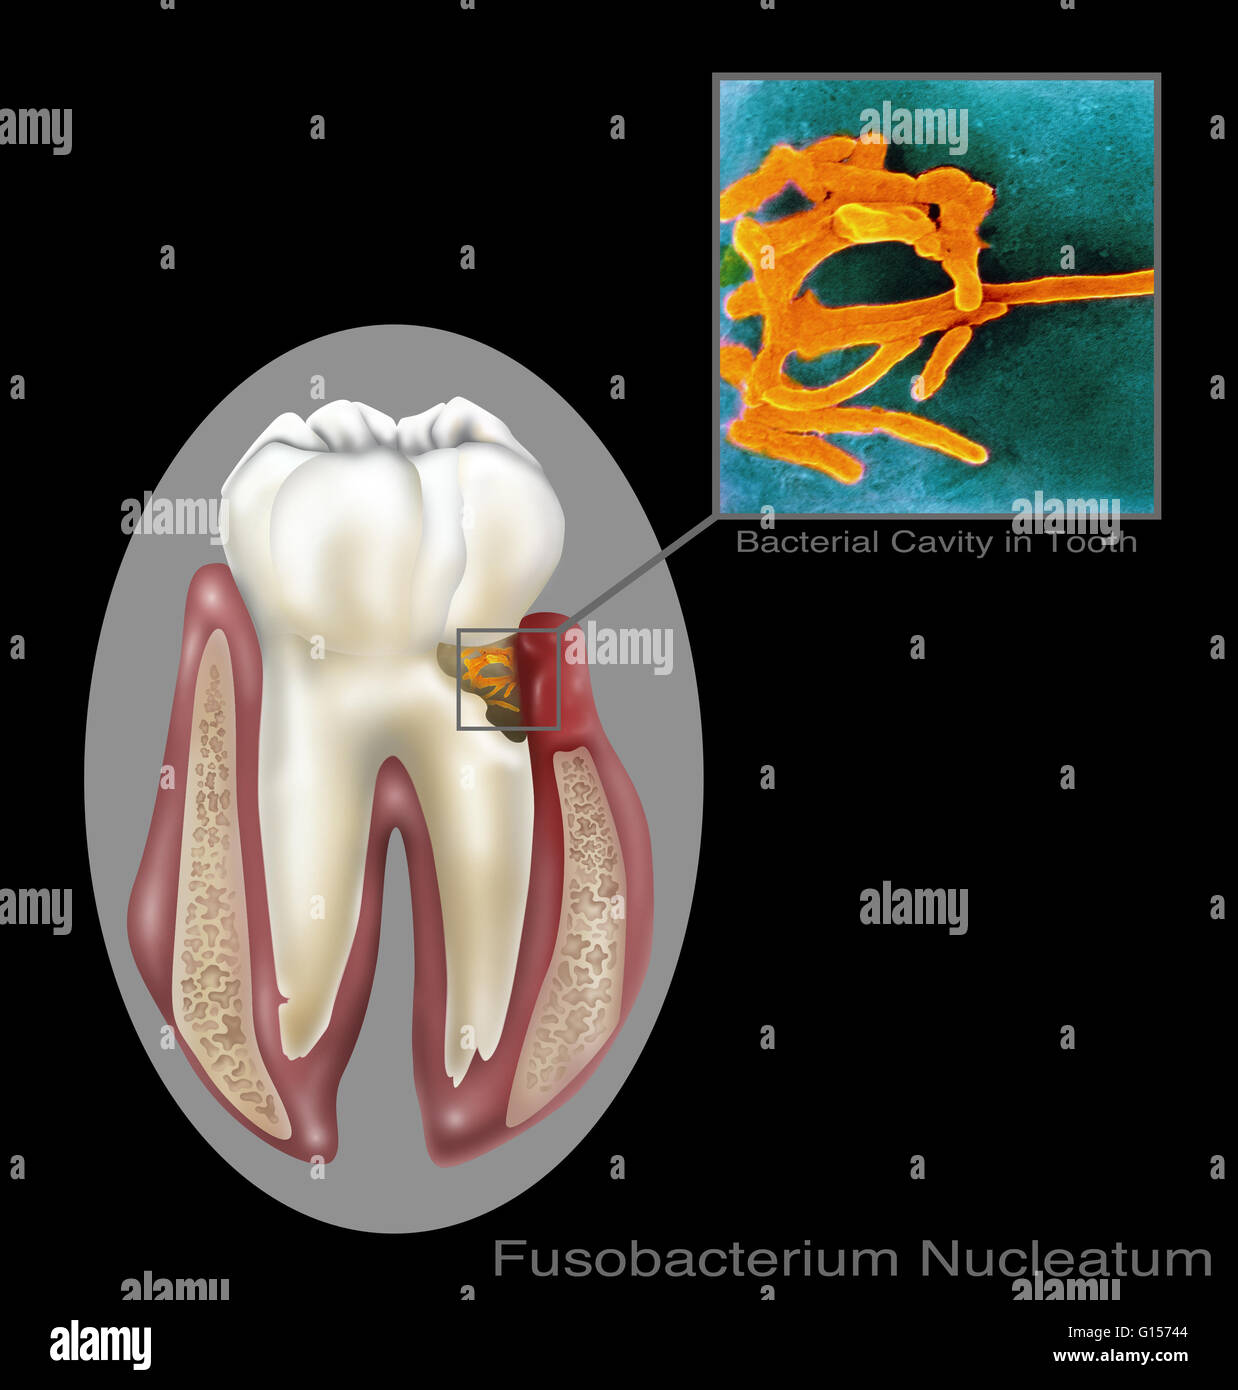 Fusobacterium nucleatum, oral bacteria found in the dental plaque of humans. Associated with the periodontal gum disease. Stock Photo